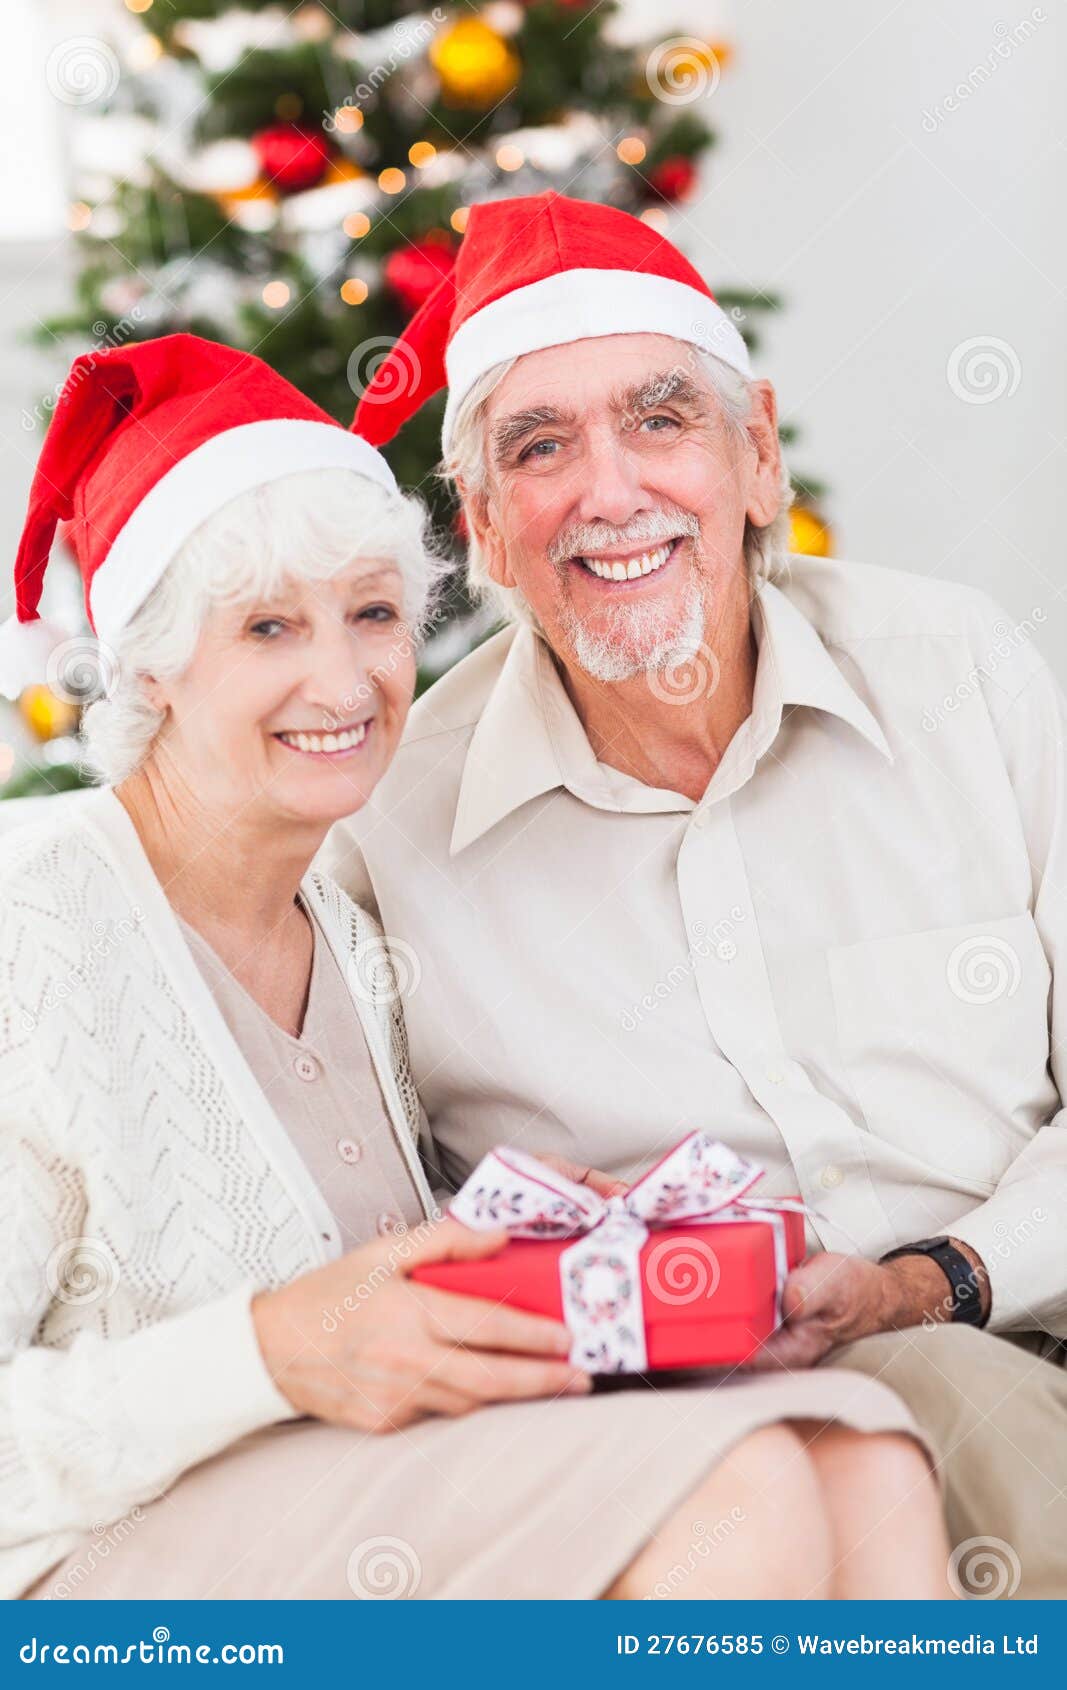 Swapping Wife Stock Photos picture